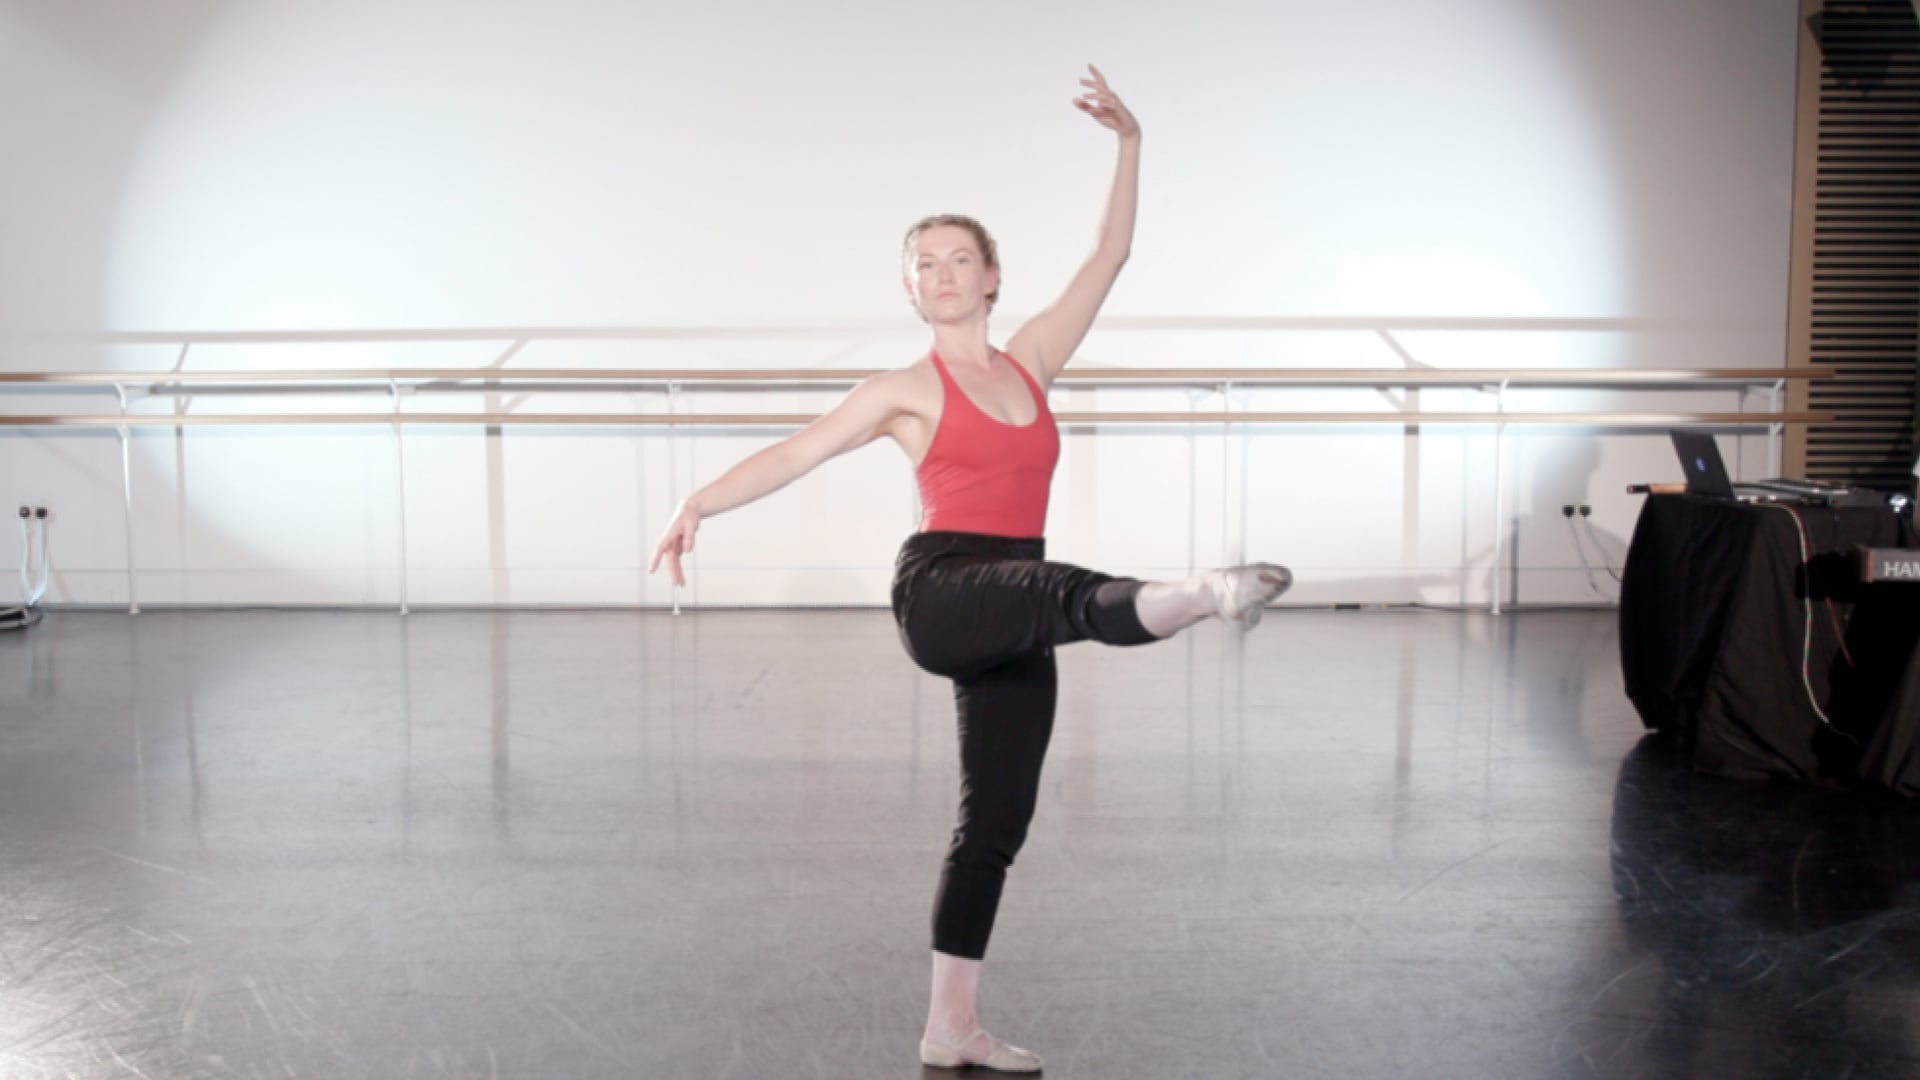 a woman in a red tank top is doing a ballet move.